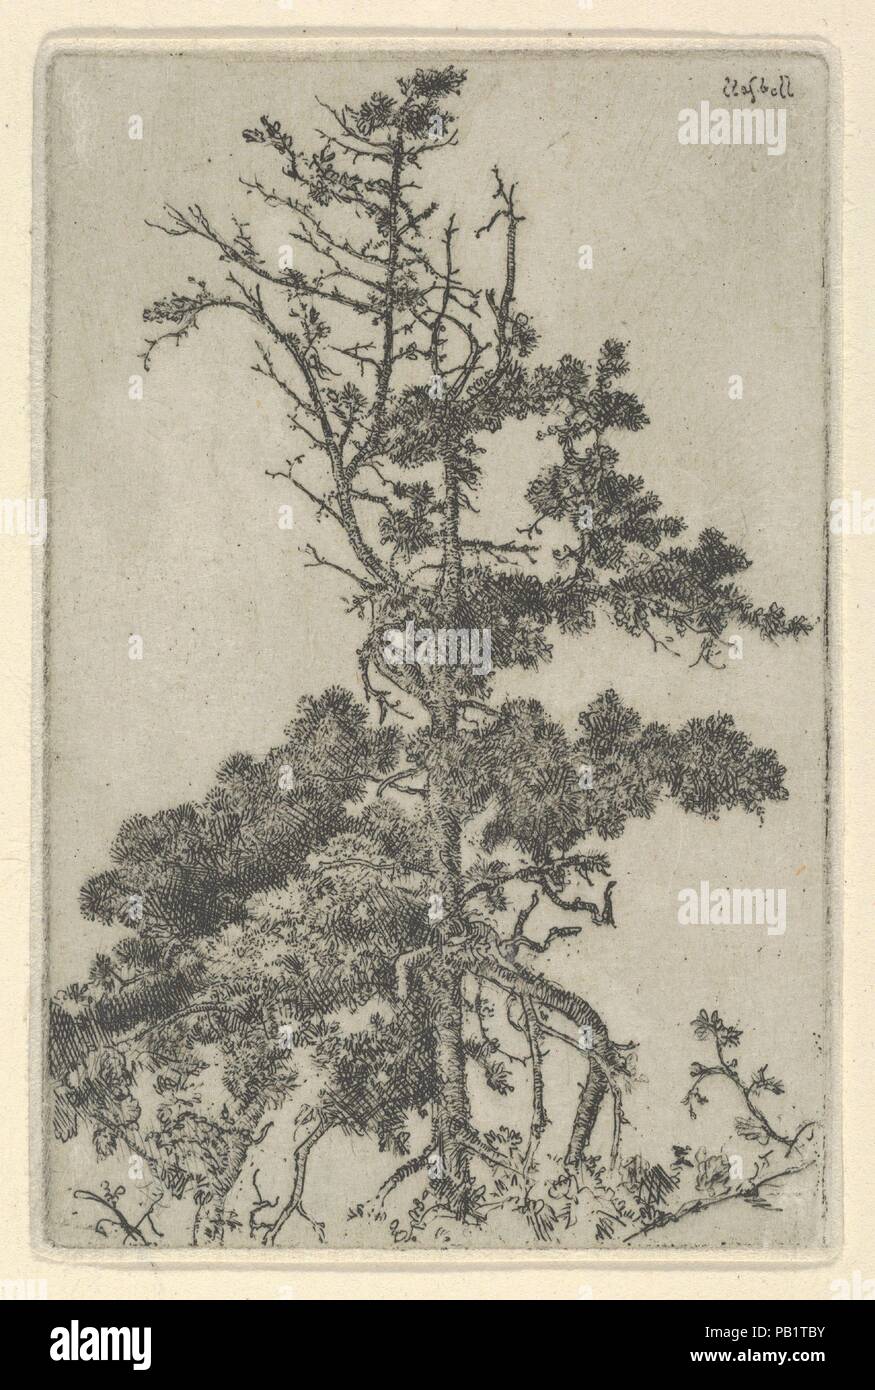 Tree Top. Artist: Ernest Haskell (American, Woodstock, Connecticut 1876-1925 West Point, Maine). Dimensions: Sheet (Trimmed): 3 1/16 × 2 1/16 in. (7.7 × 5.2 cm). Date: 1900-1925. Museum: Metropolitan Museum of Art, New York, USA. Stock Photo